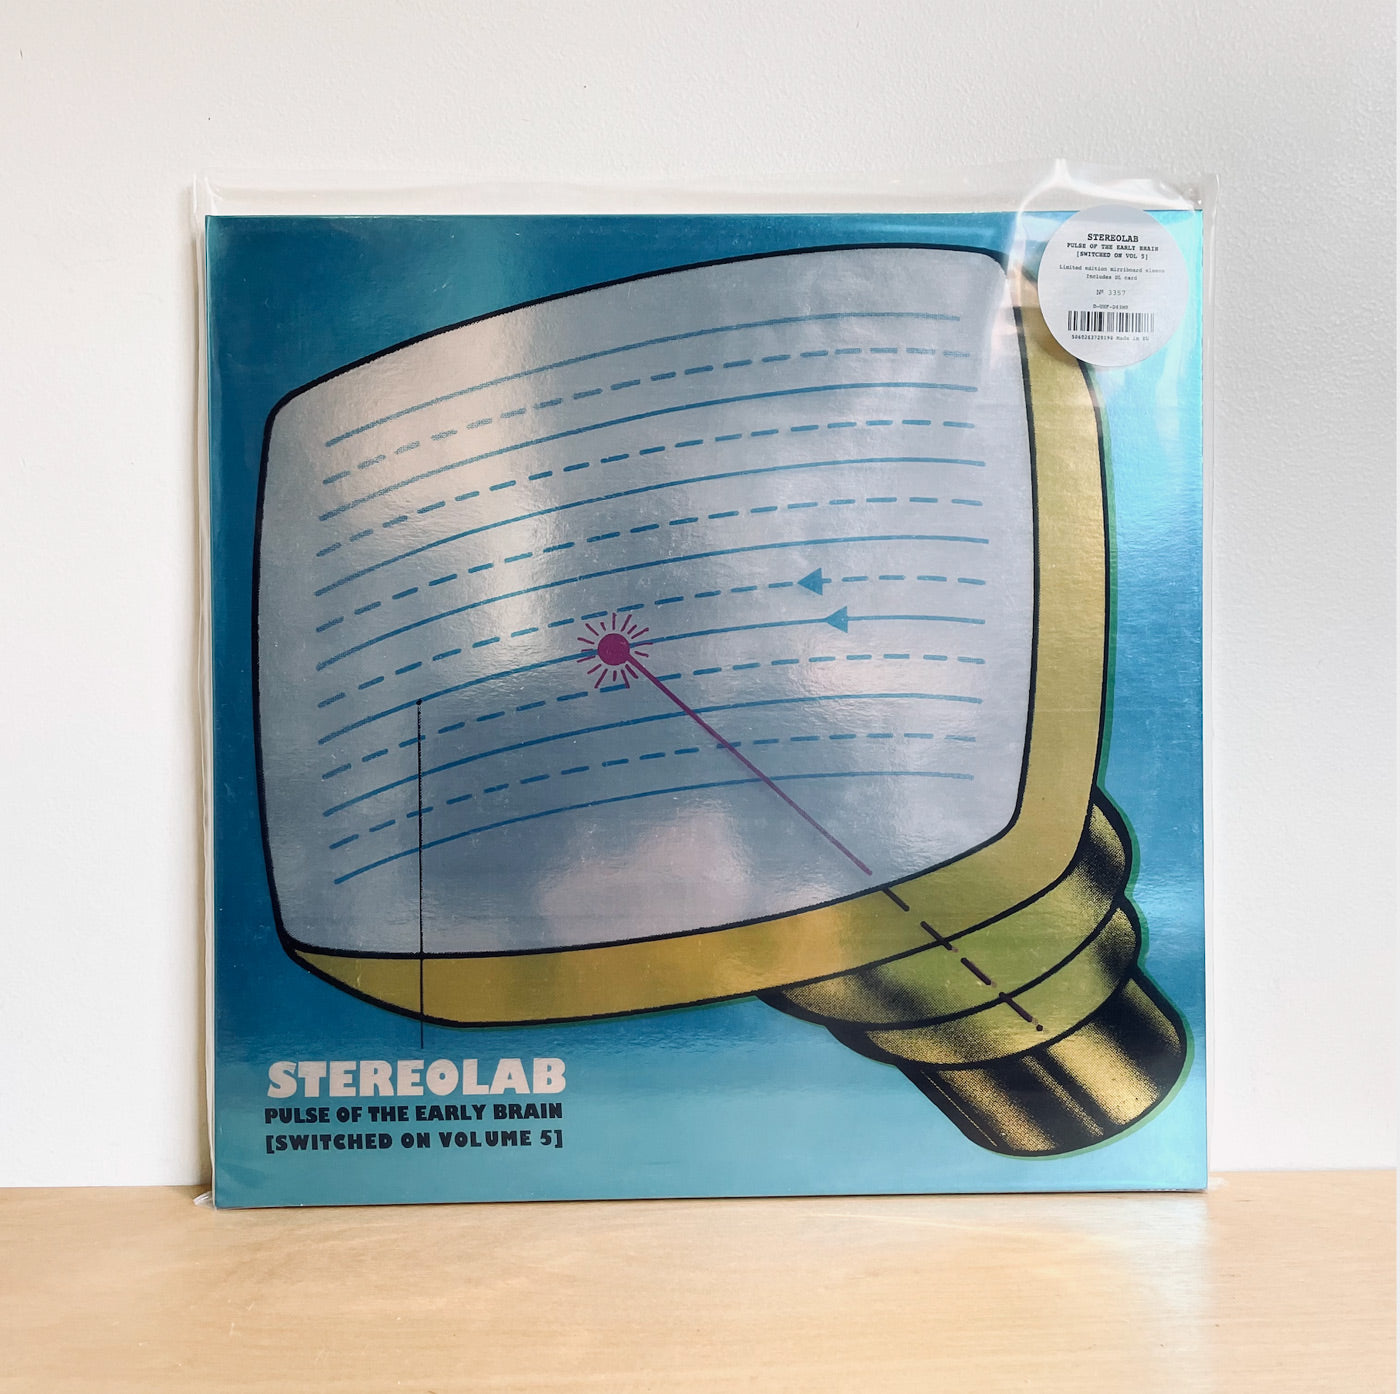 Stereolab - Pulse Of The Early Brain [Switched On Volume 5]. 3LP [Ltd Numbered Mirrorboard Edition]